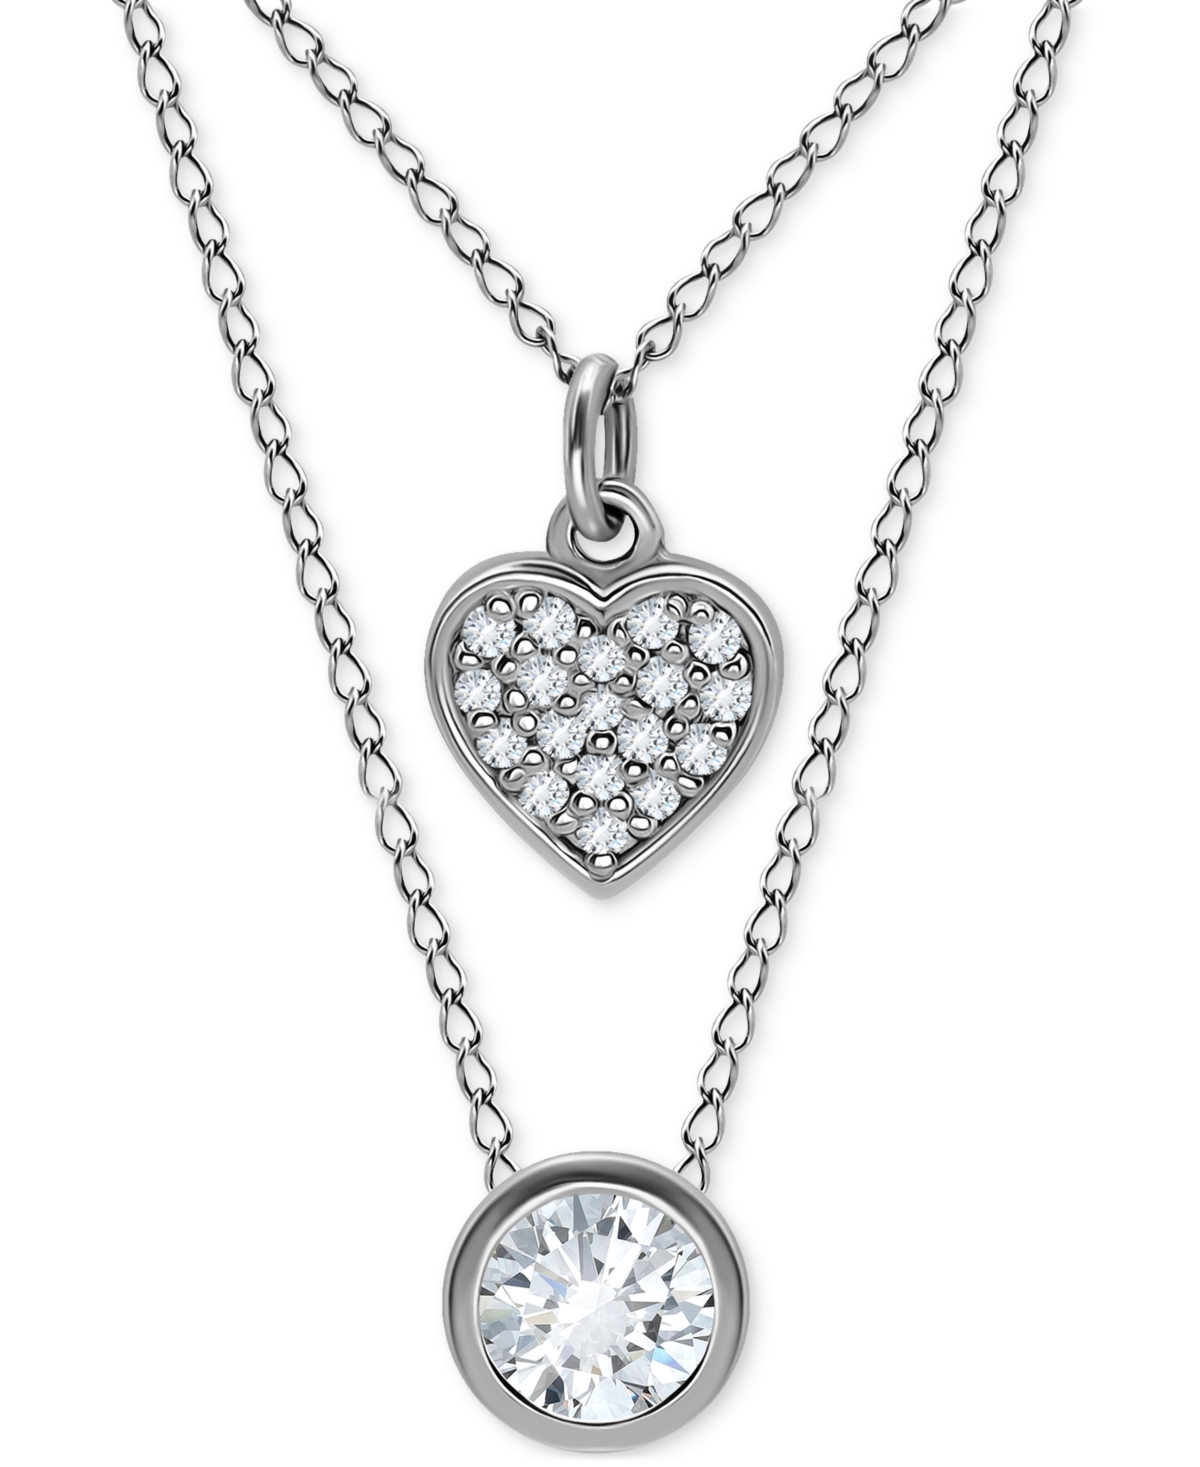 Giani Bernini 2-pc. Set Cubic Zirconia Pave Heart & Solitaire Bezel Pendant Necklaces, Created For Macy's In Silver